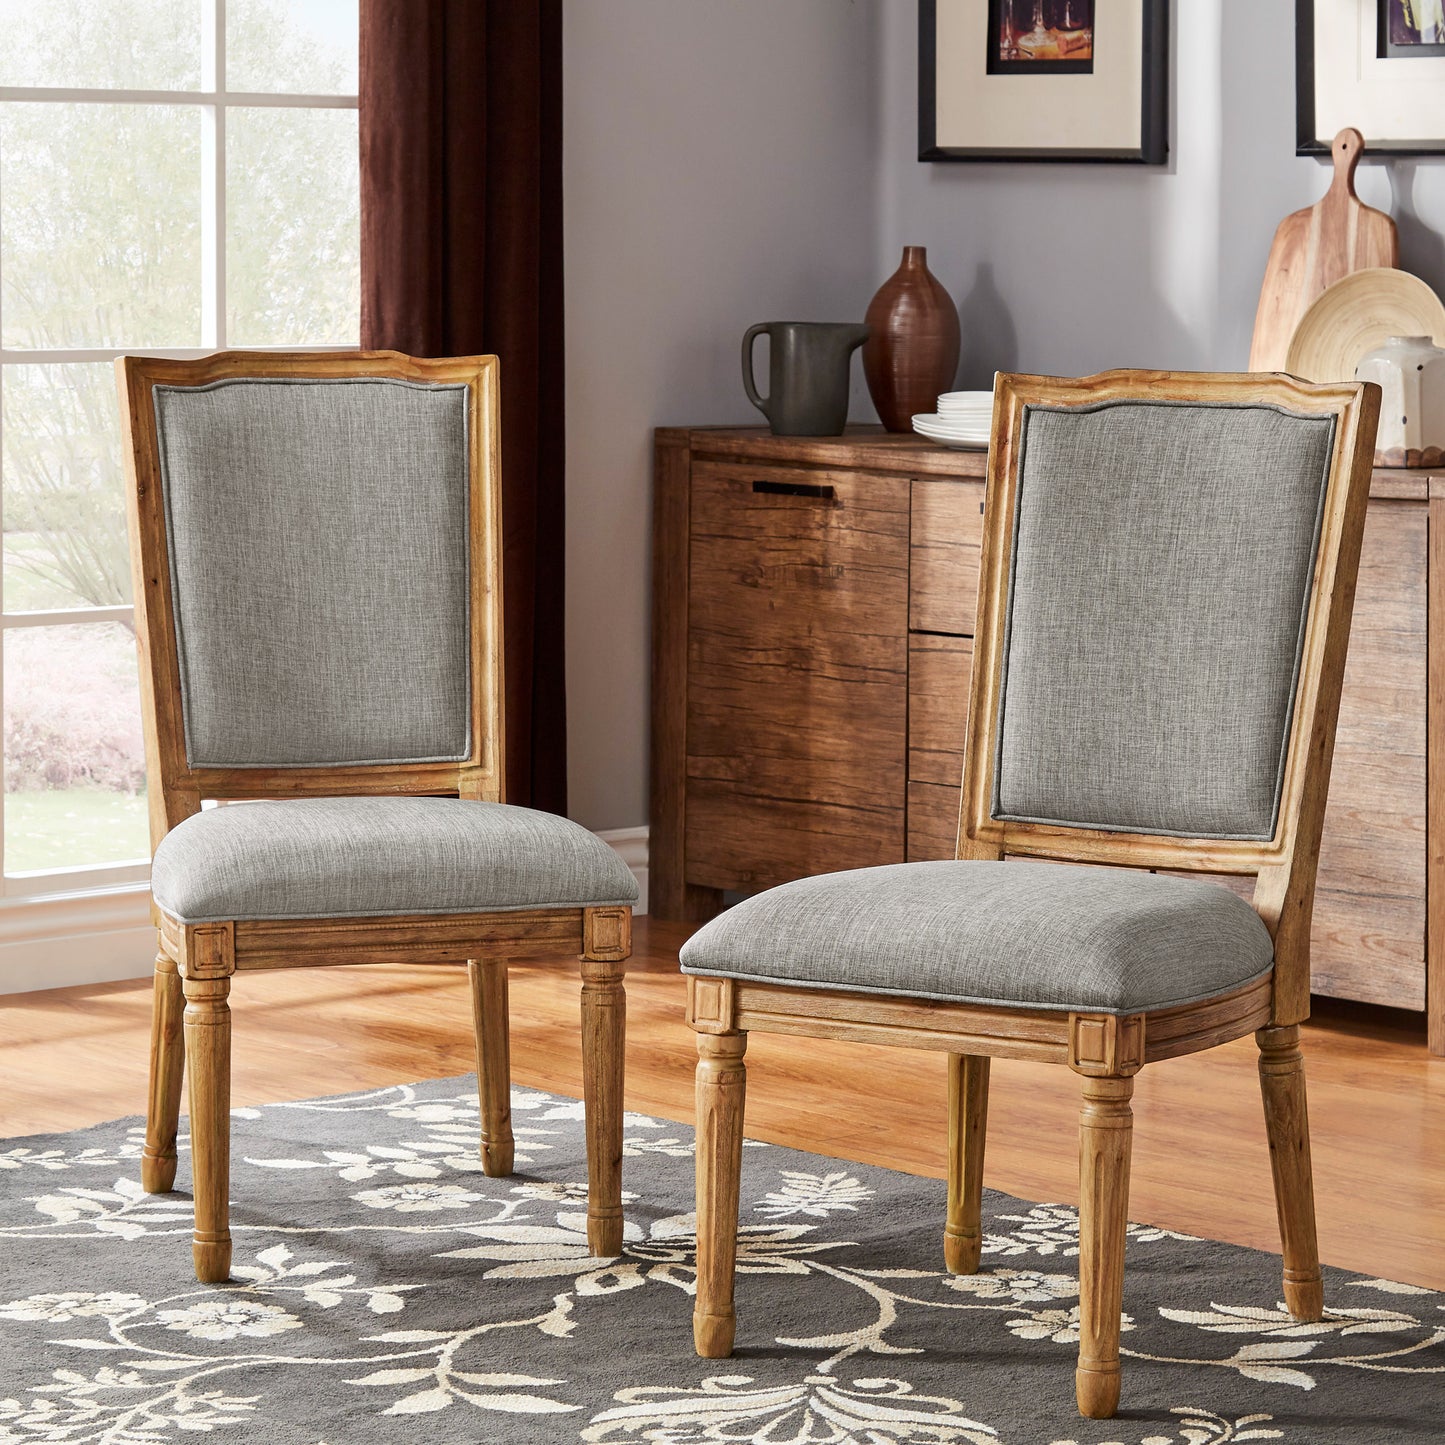 Ornate Linen and Wood Dining Chairs (Set of 2) - Grey Linen, Natural Finish